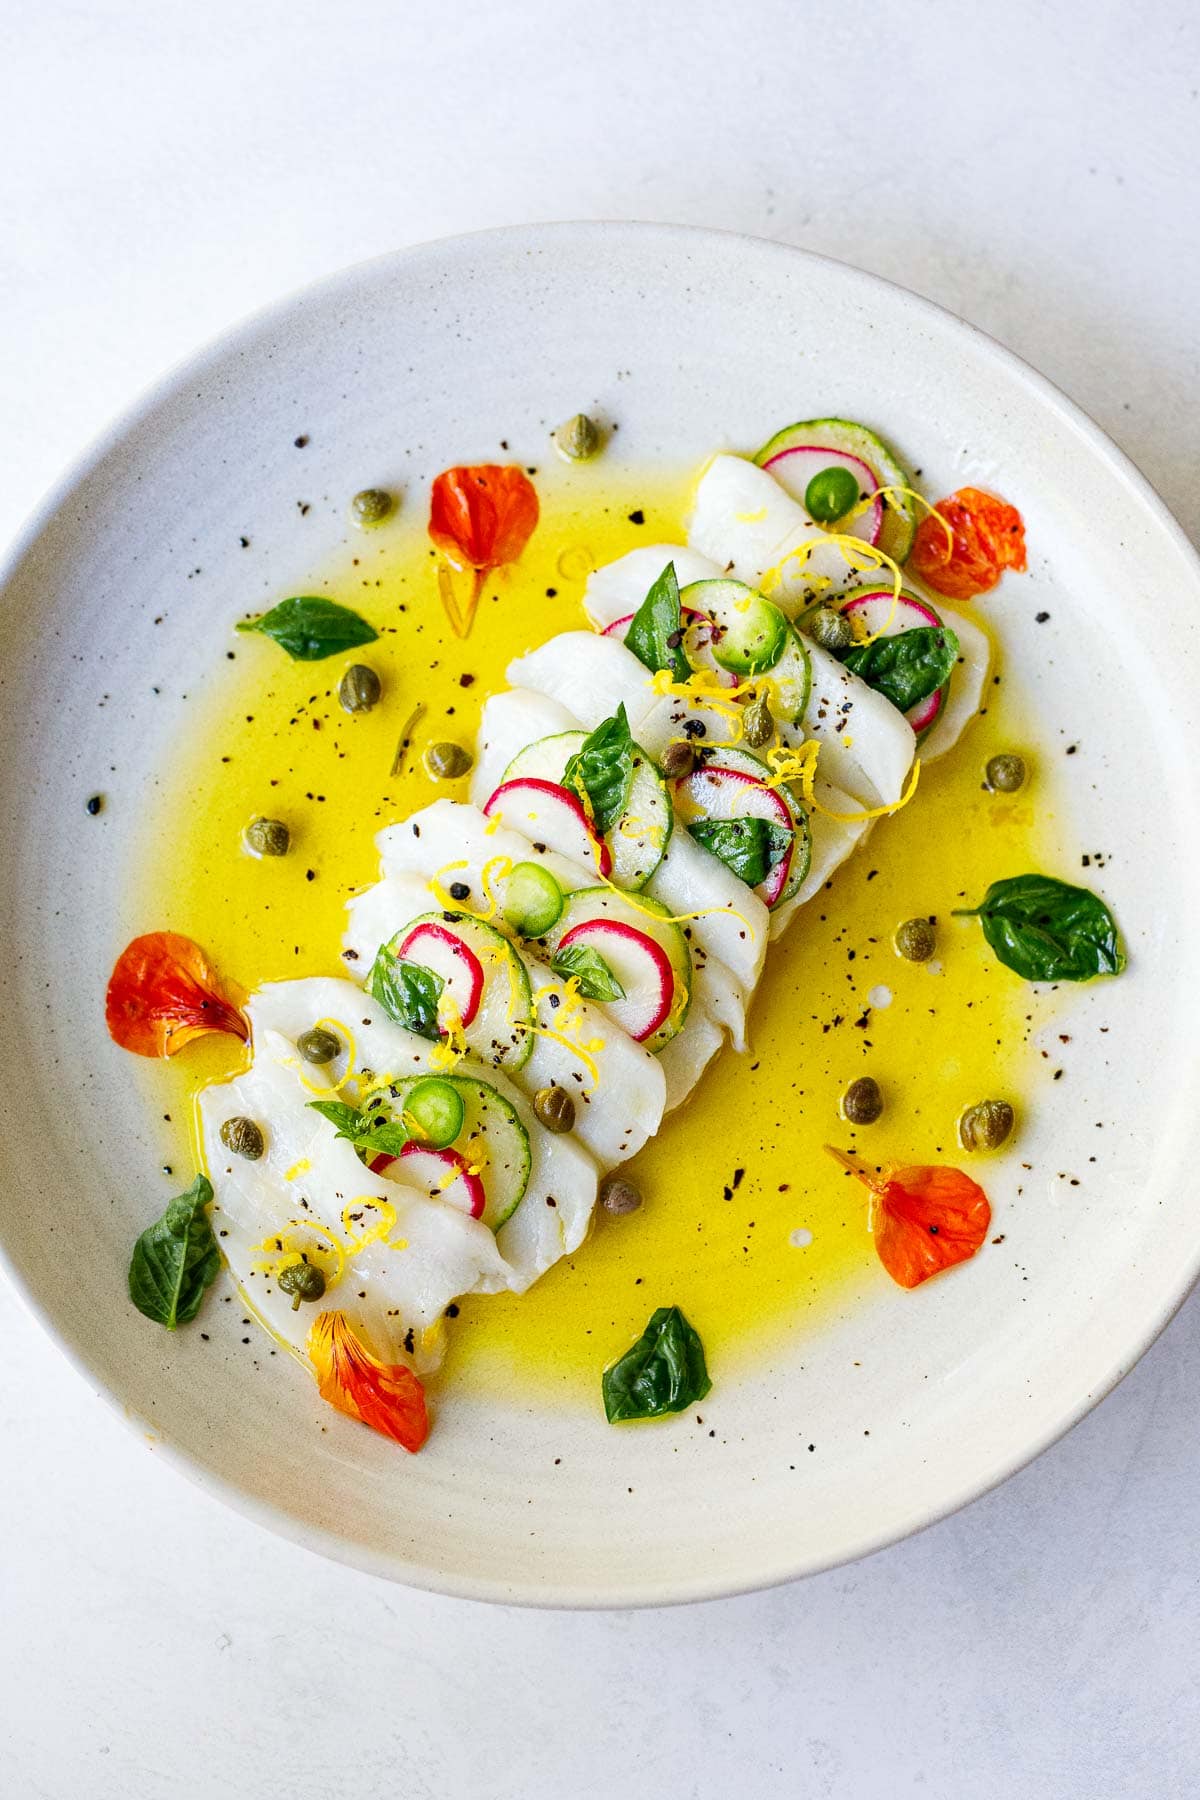 This hamachi crudo recipe is easy to make at home!